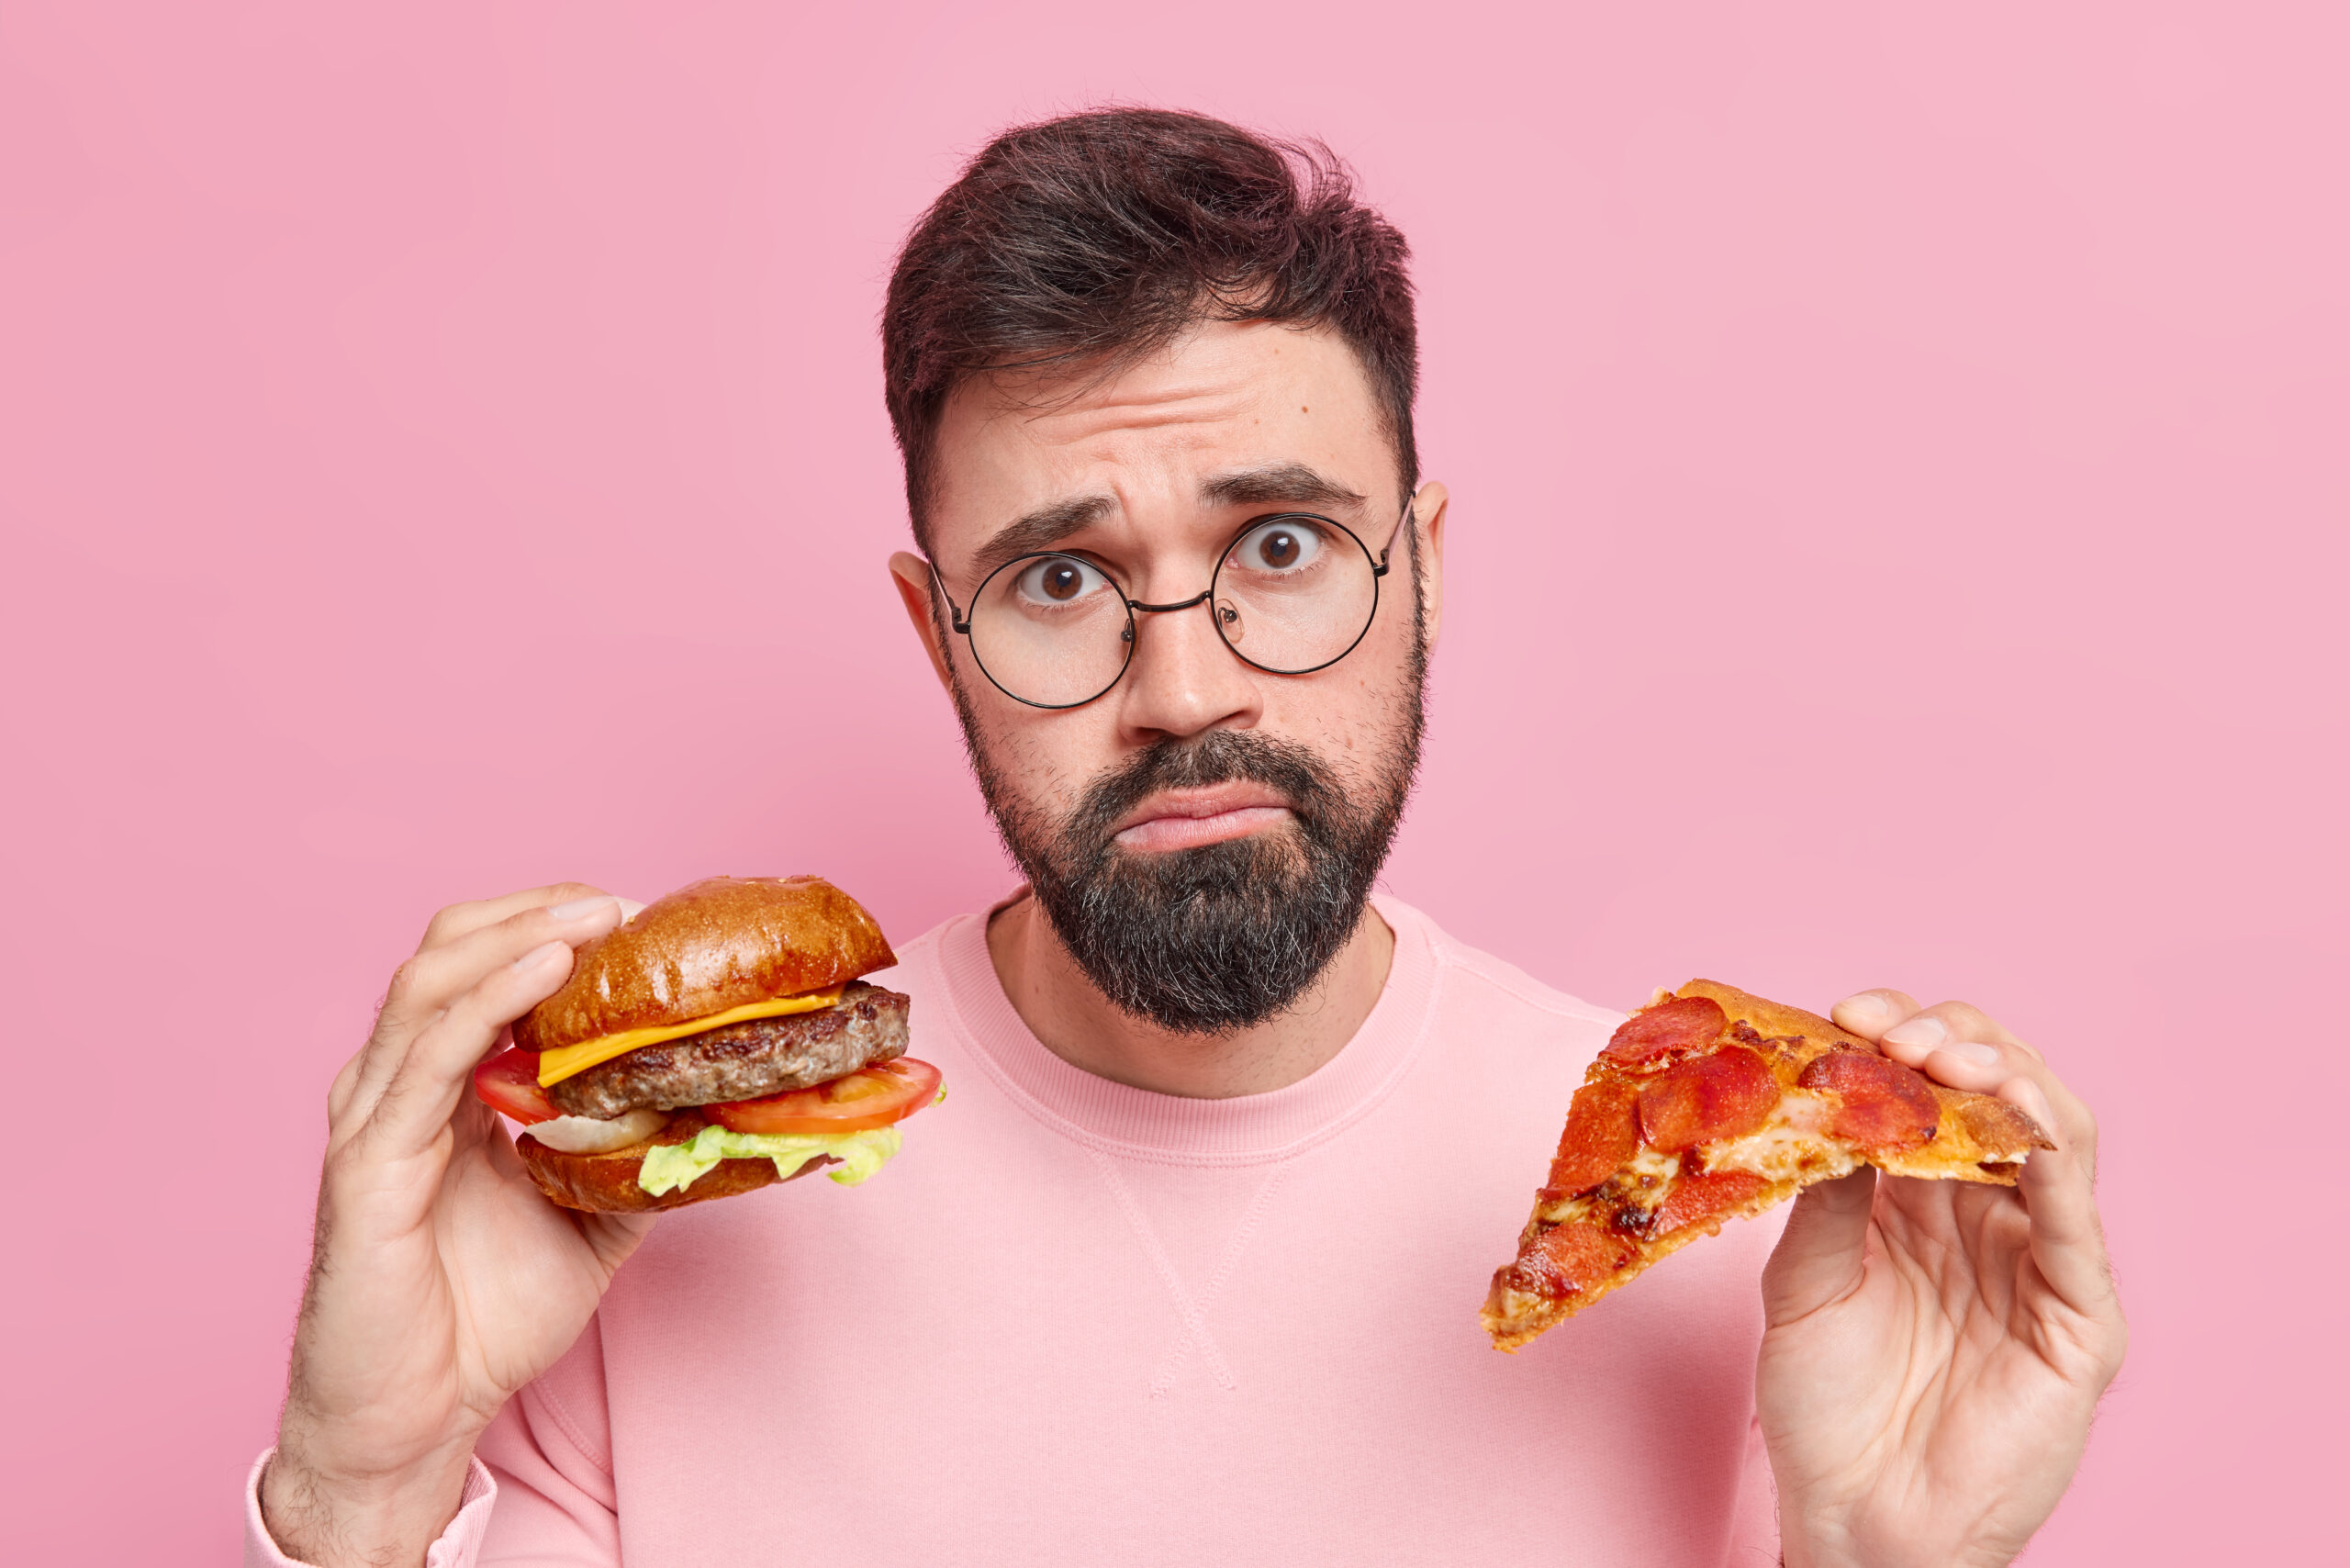 Know why foods like burger pizza and coke raise risk of depression